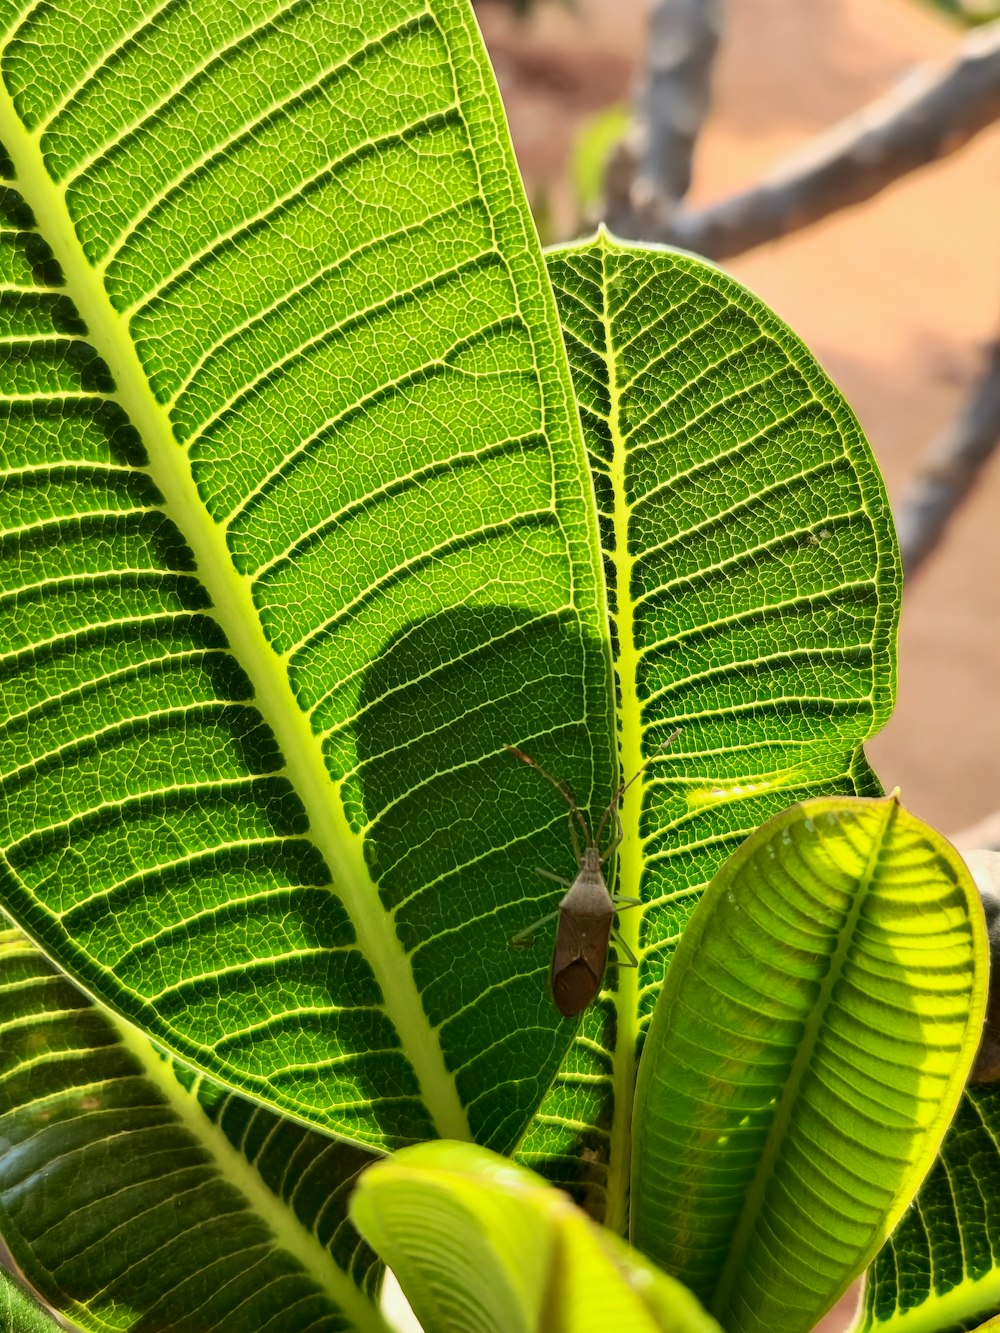 a green leaf with a bug on it